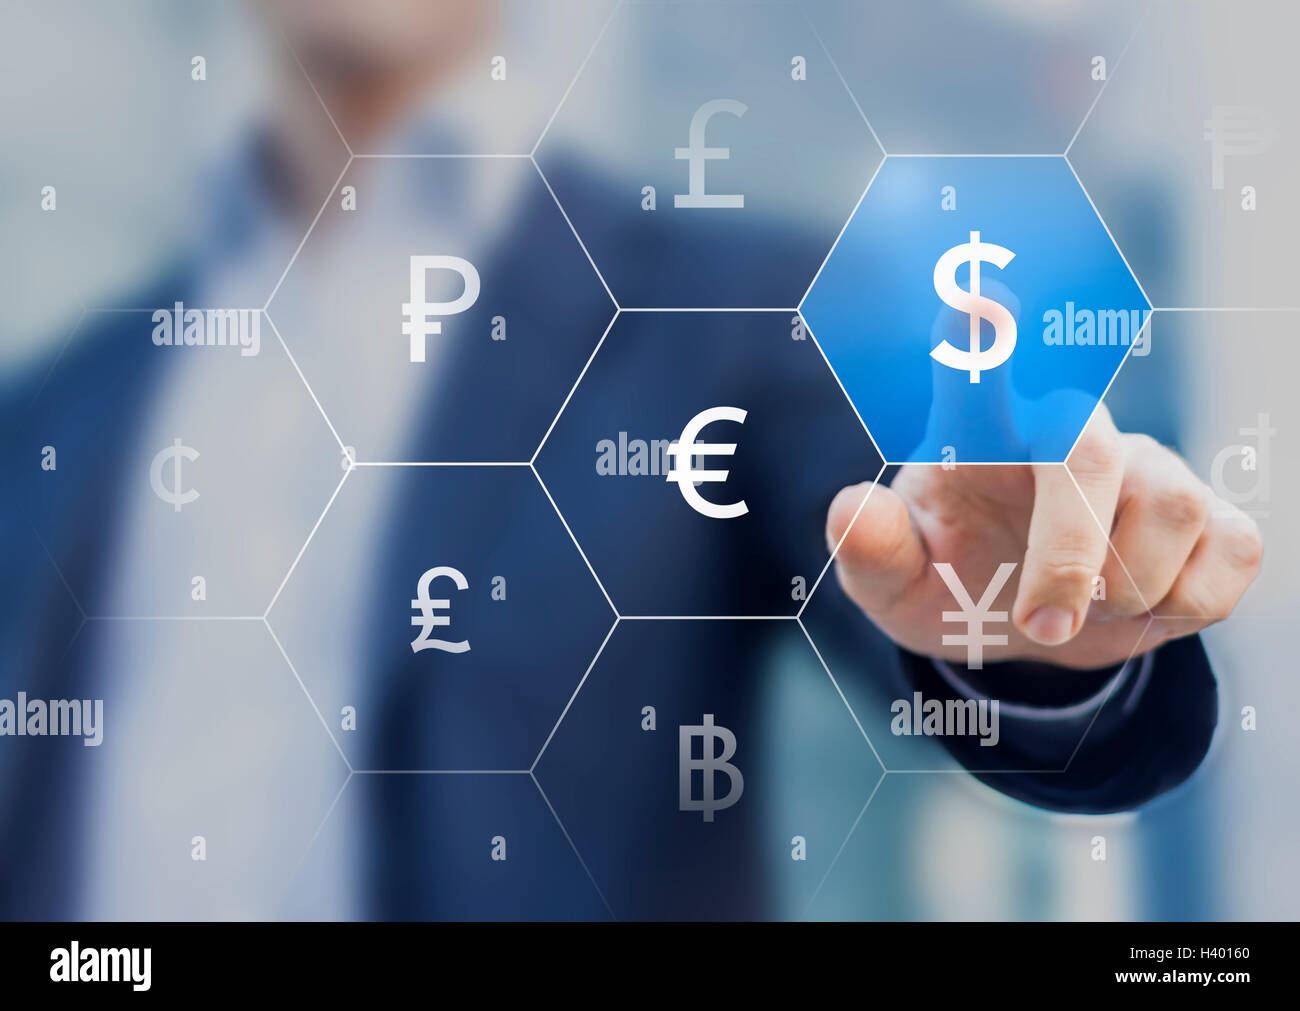 Businessman presenting currencies on virtual screen and touching dollar sign Stock Photo